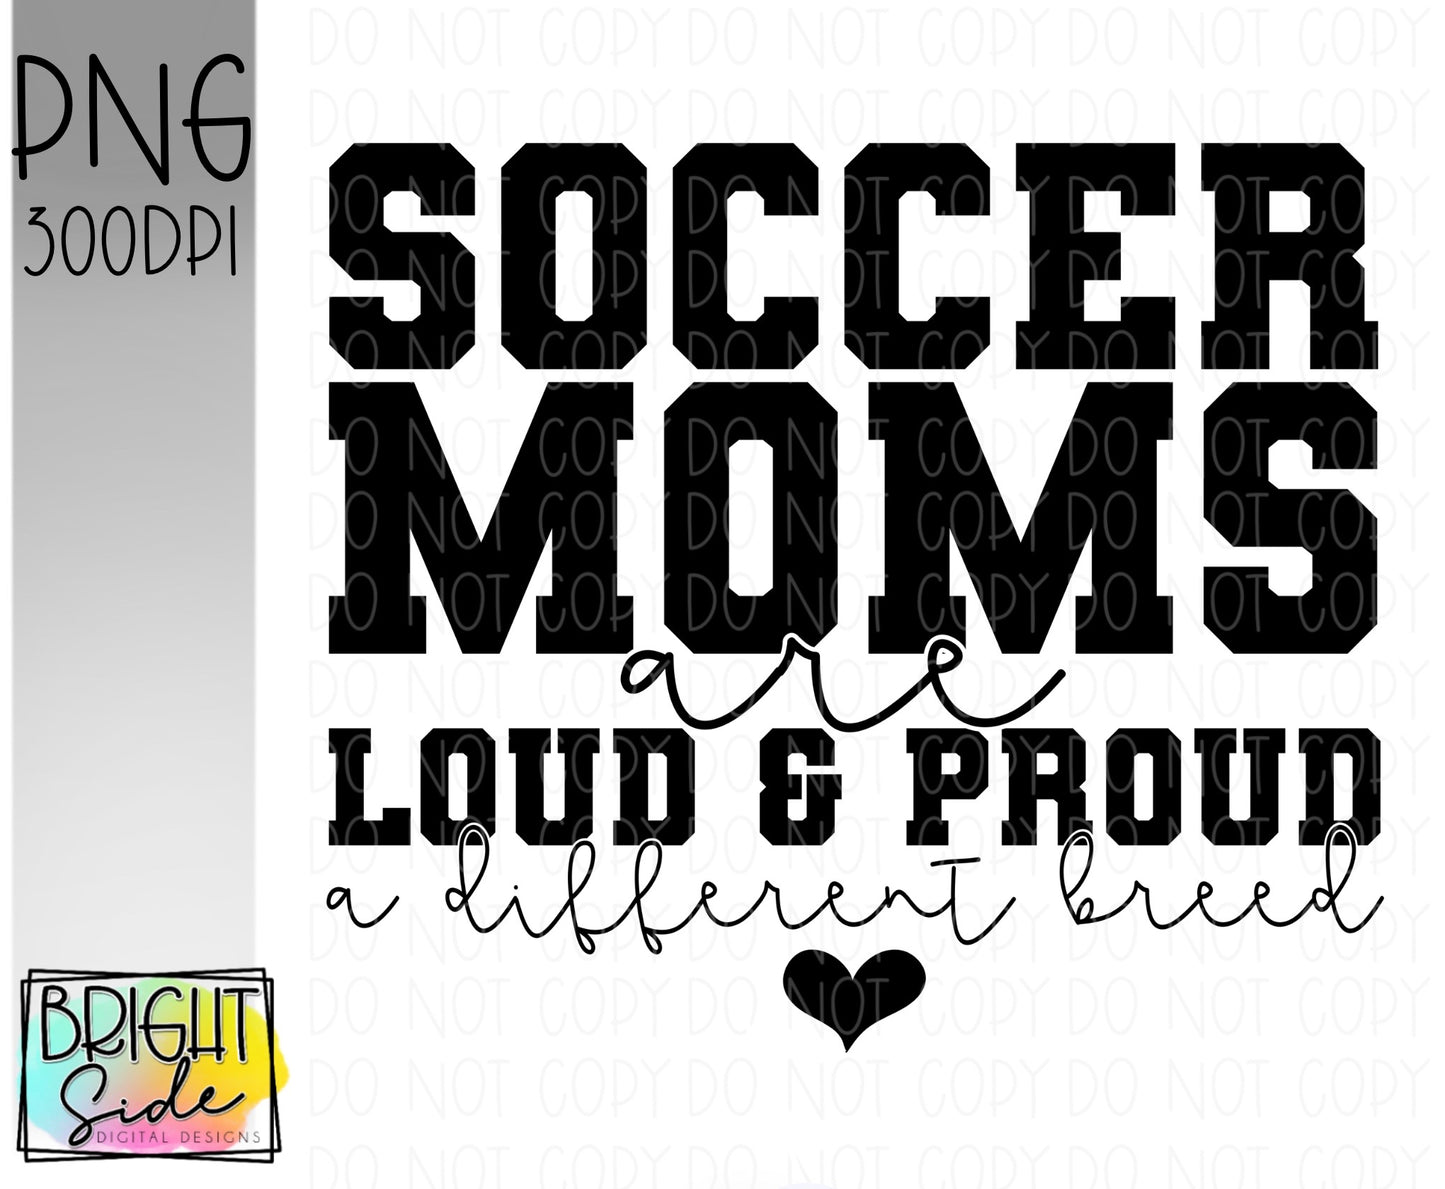 Soccer moms -a different breed